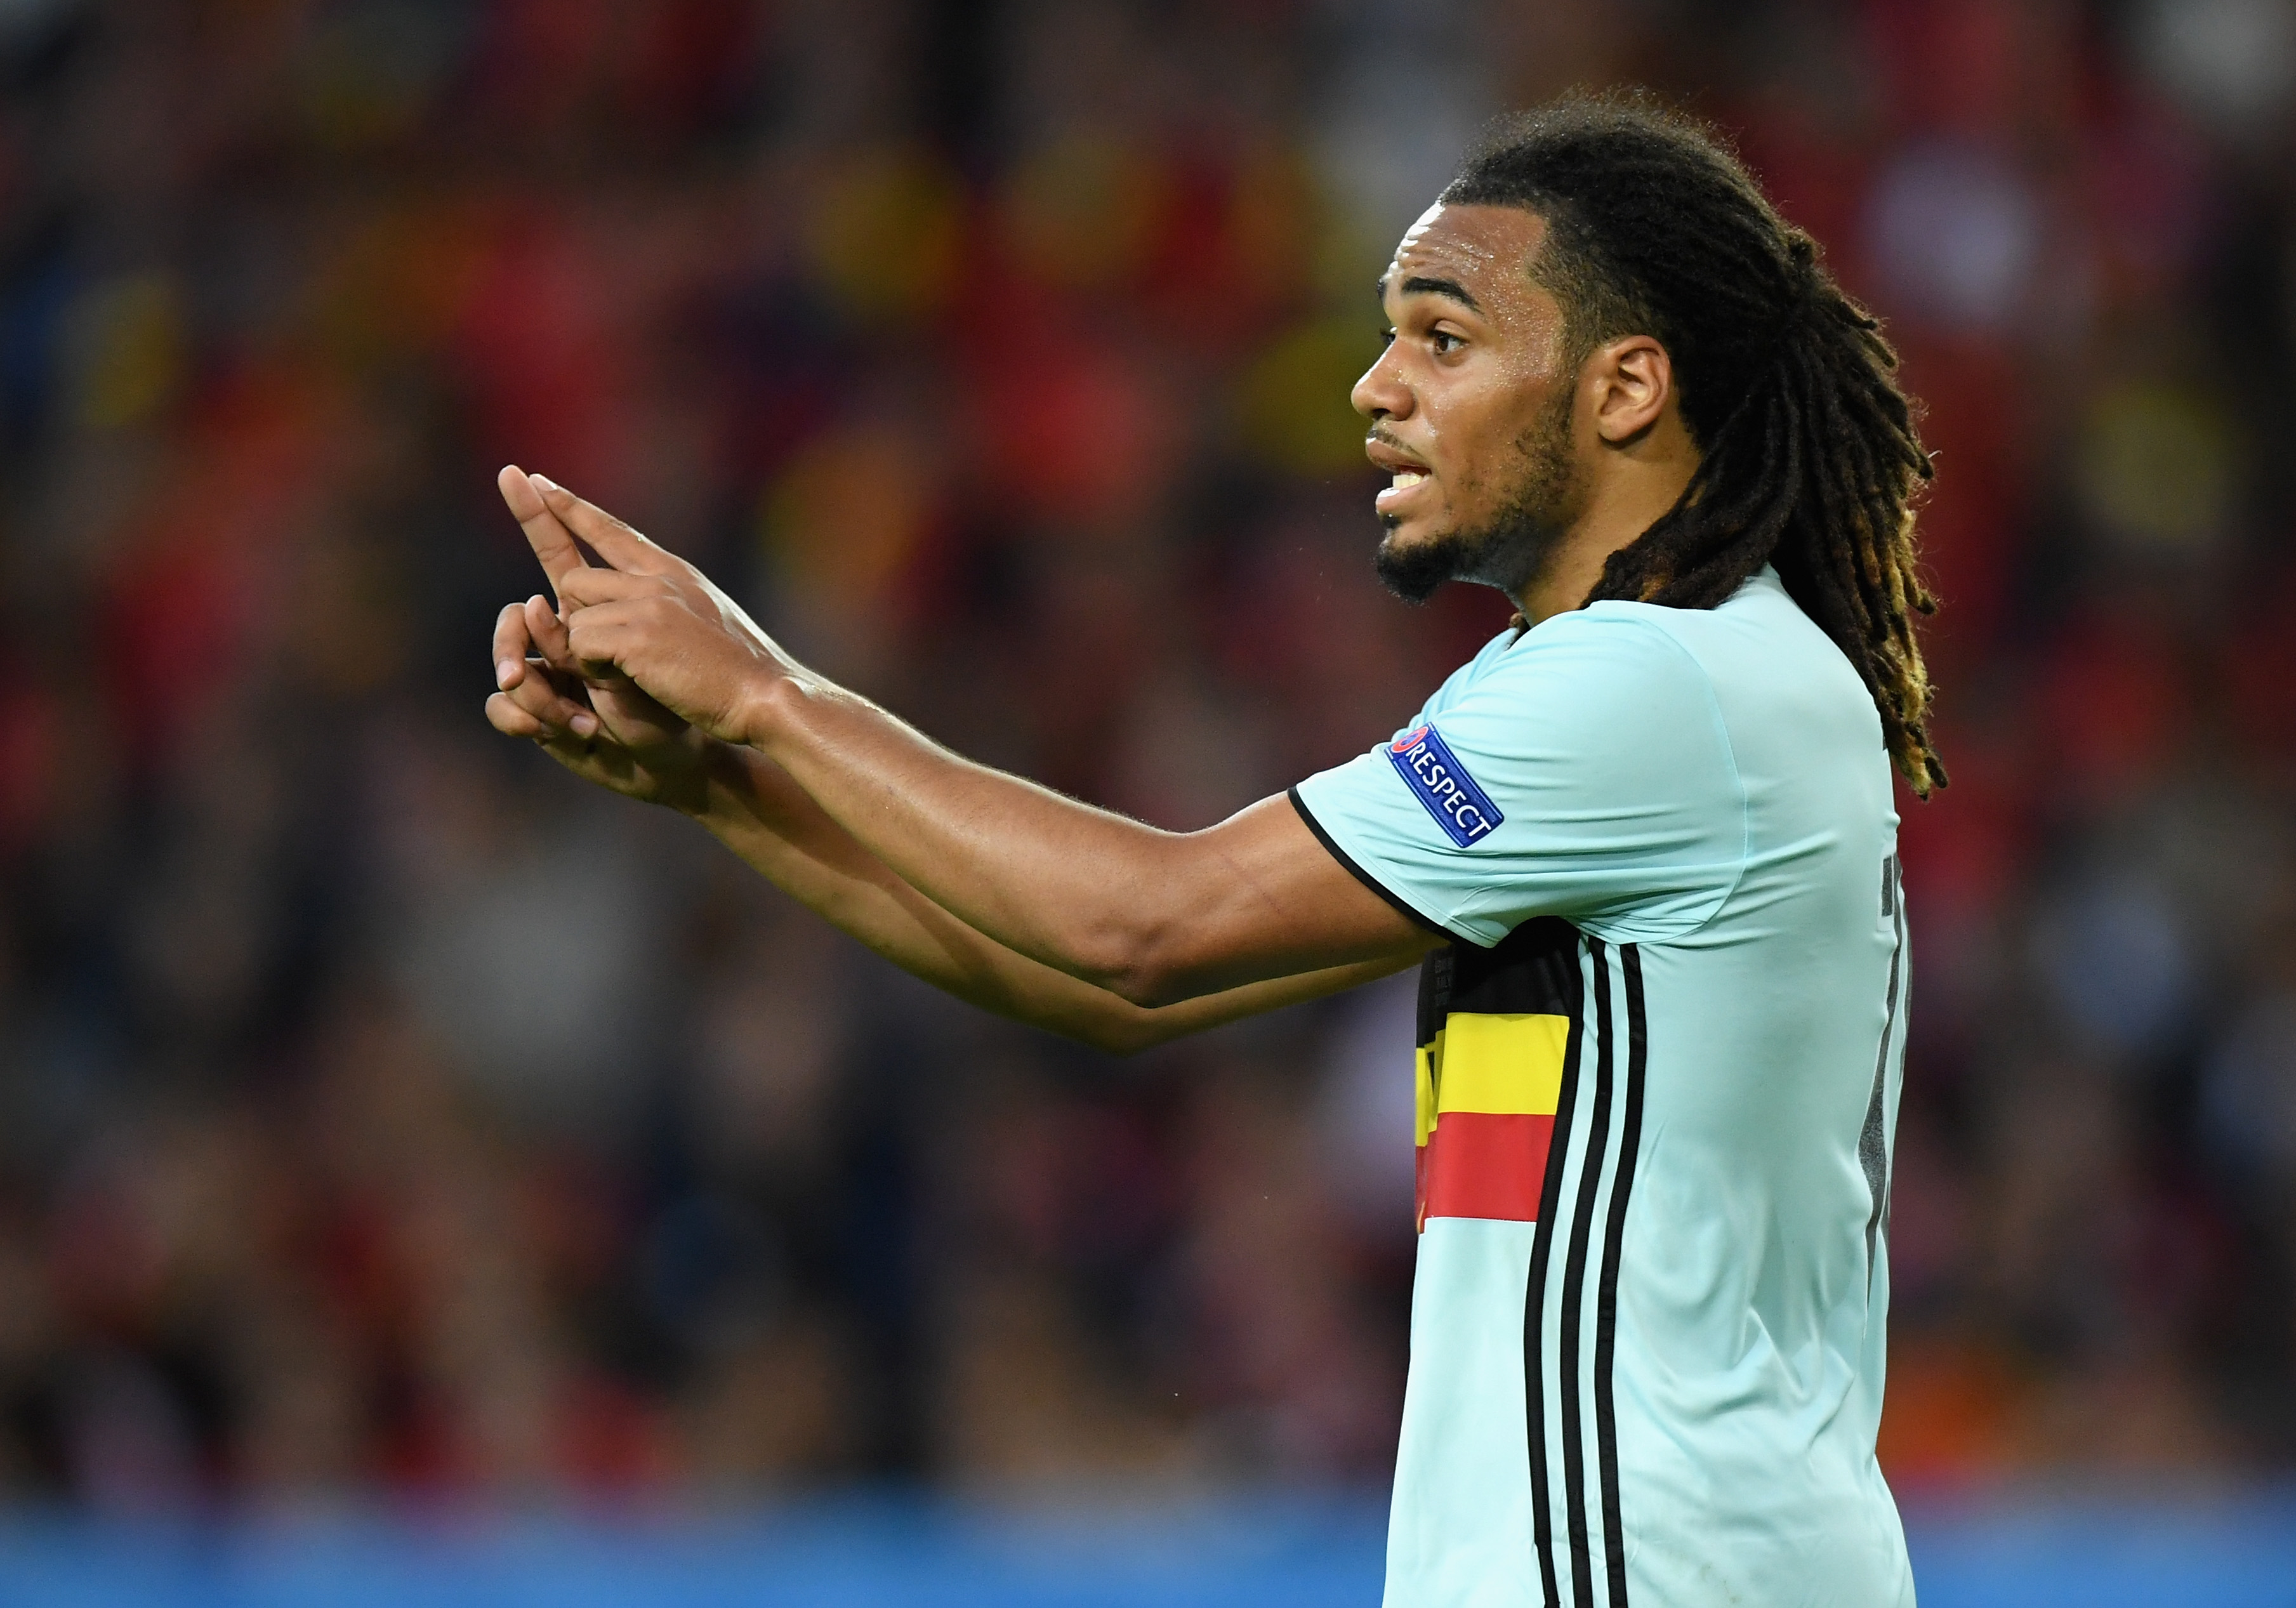 Inter Have Been Offered Jason Denayer For Free But His Wages Are High, Italian Media Report